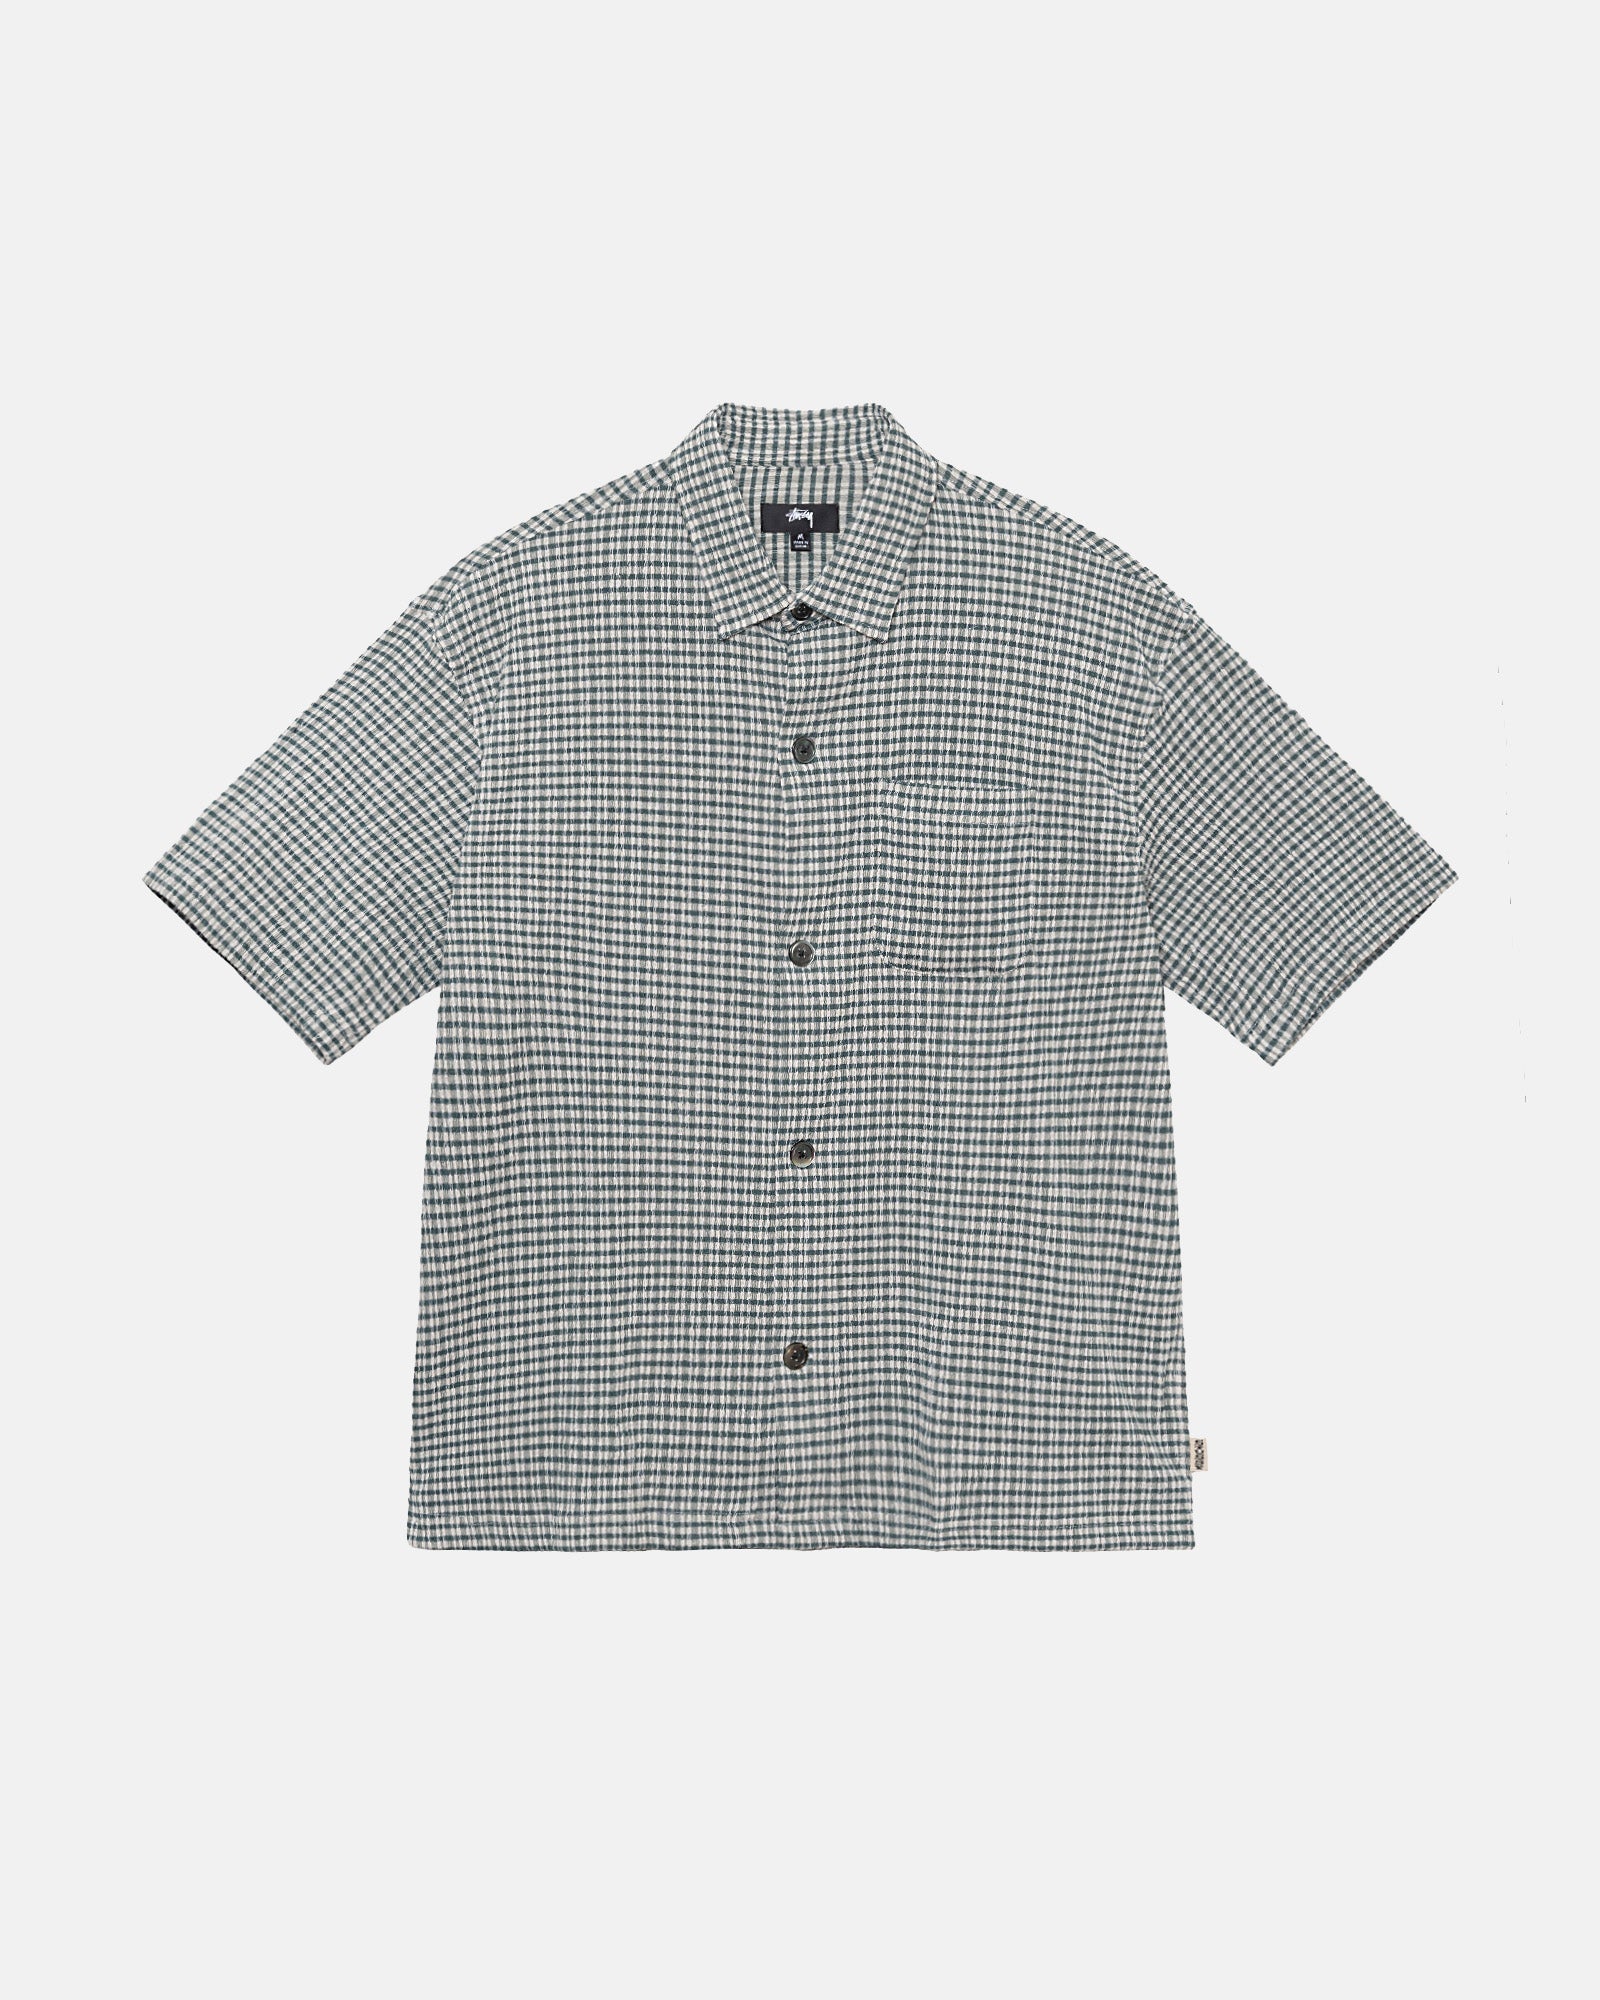 stussy 23ss WRINKLY GINGHAM SS SHIRT